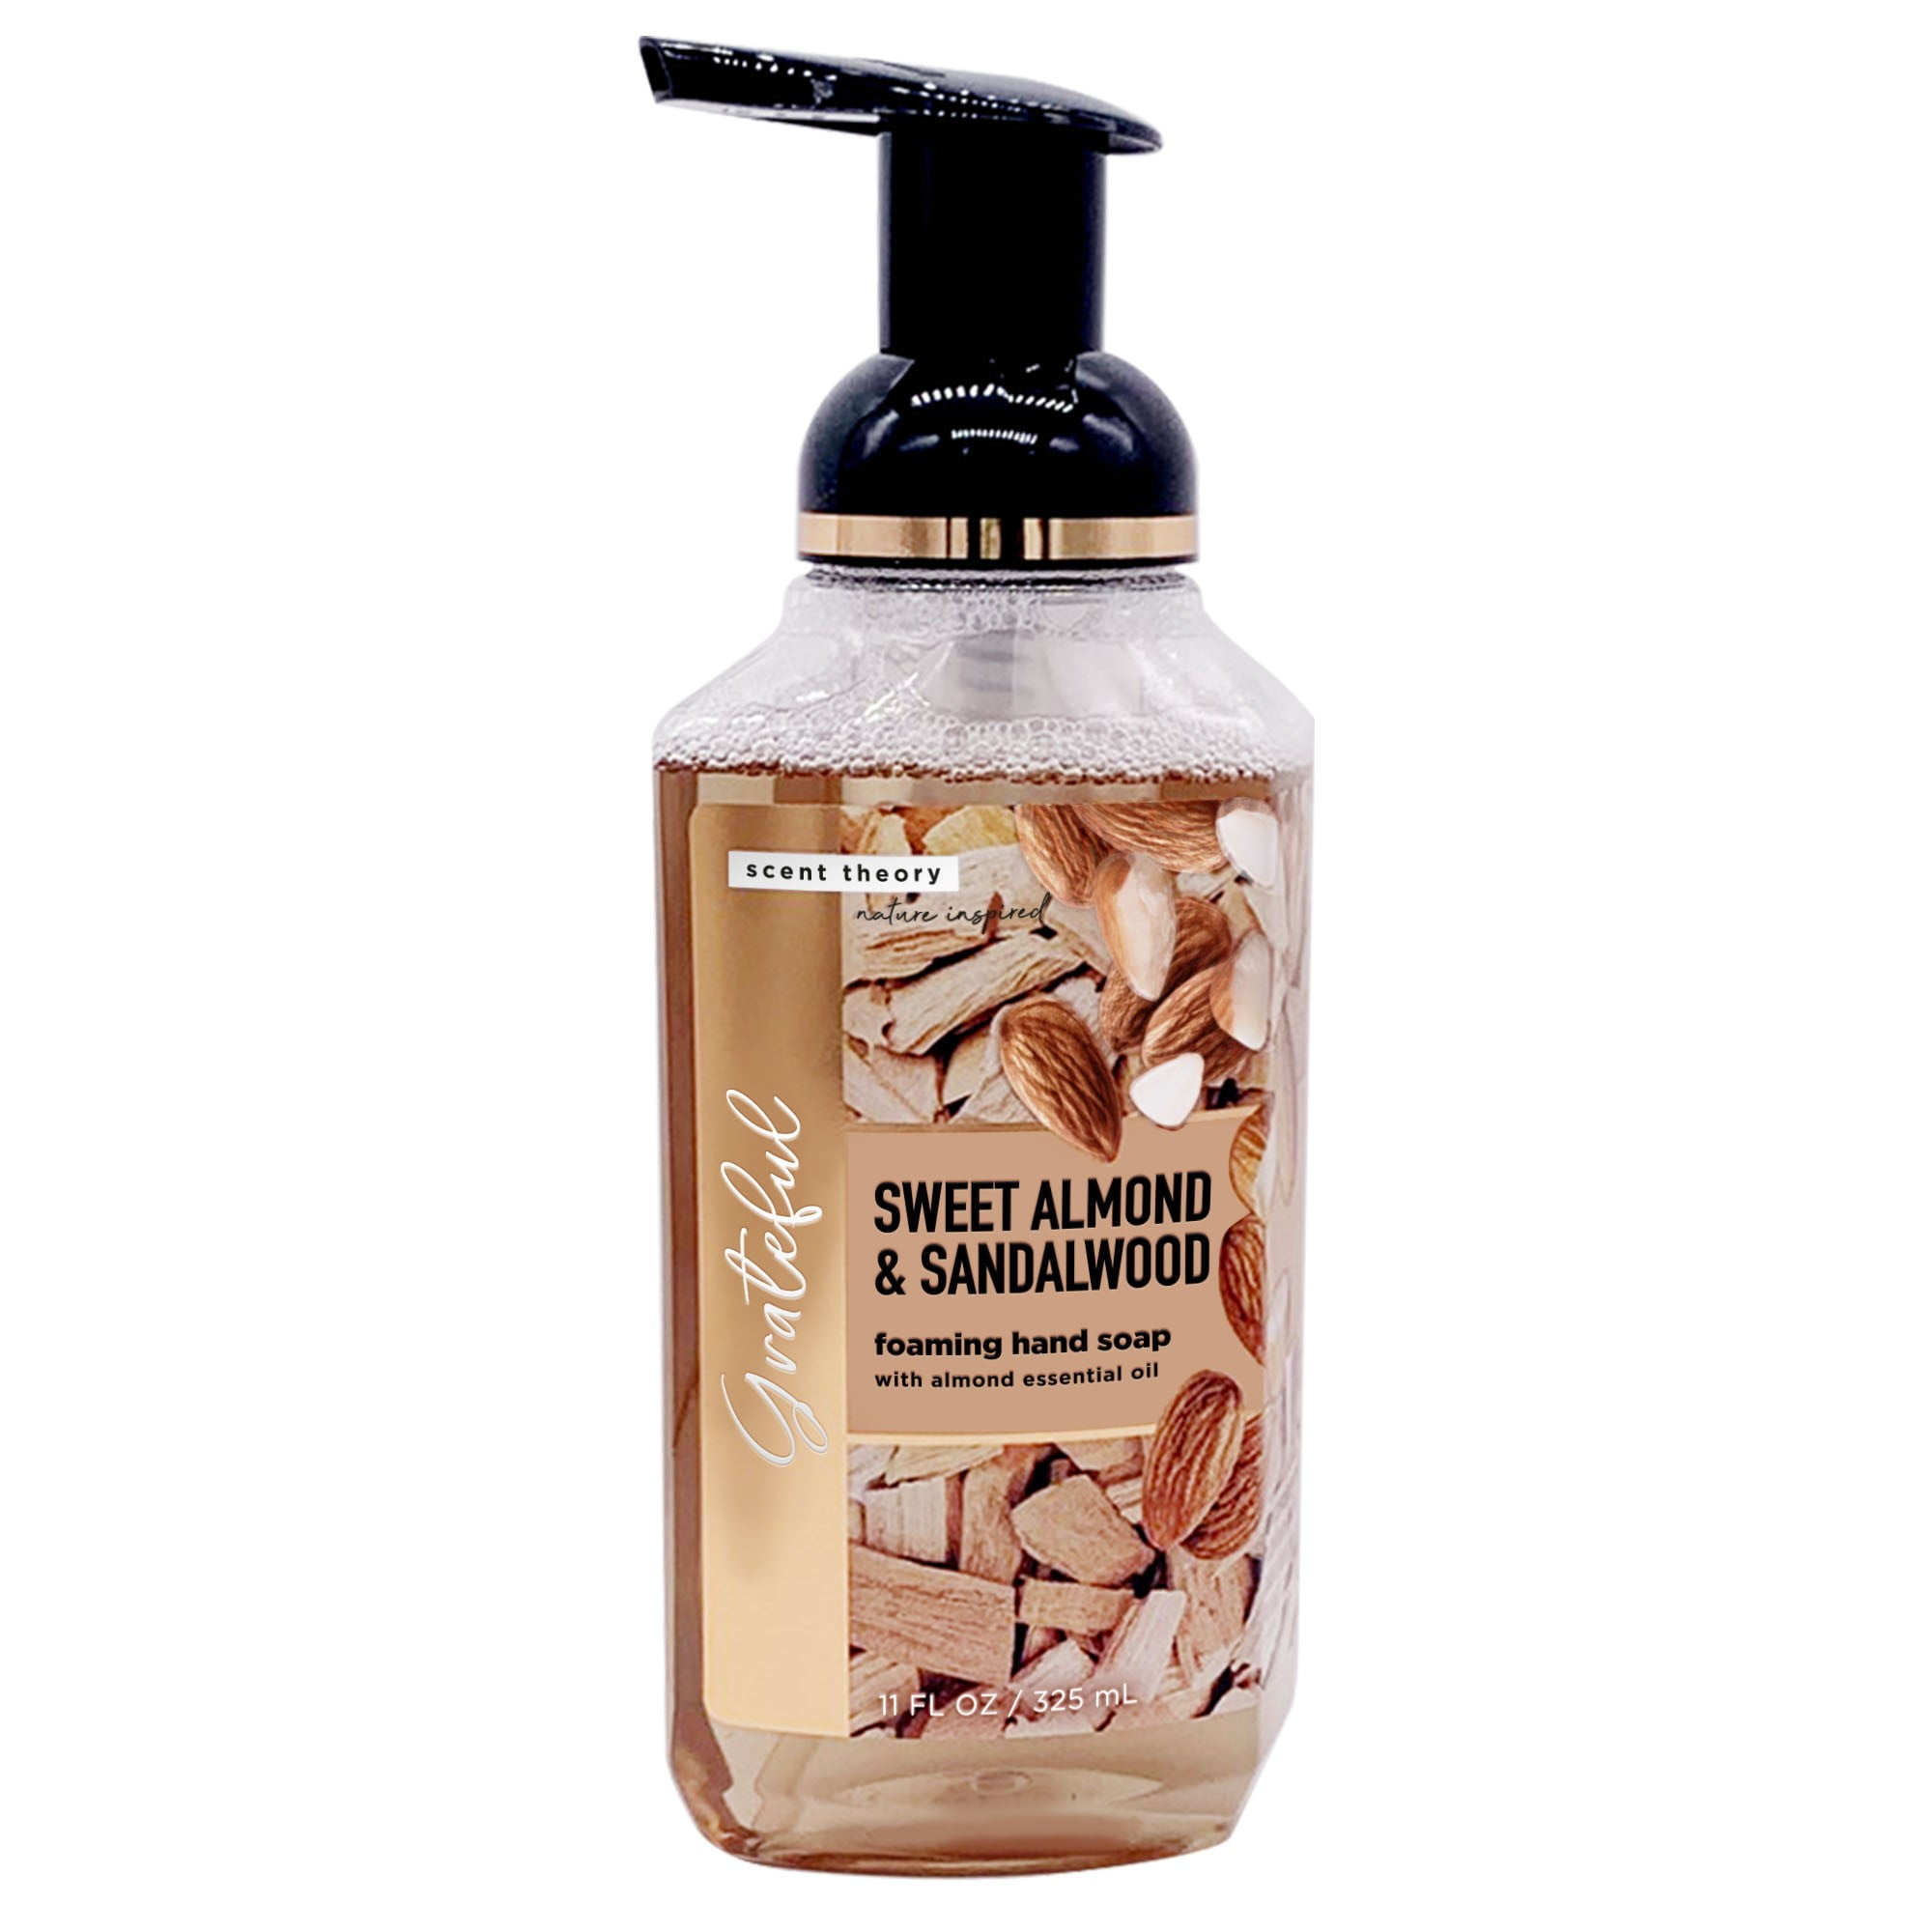 Scent Theory Nature-Inspired Foaming Hand Soap, Sweet Almond and Sandalwood, 11 fl oz